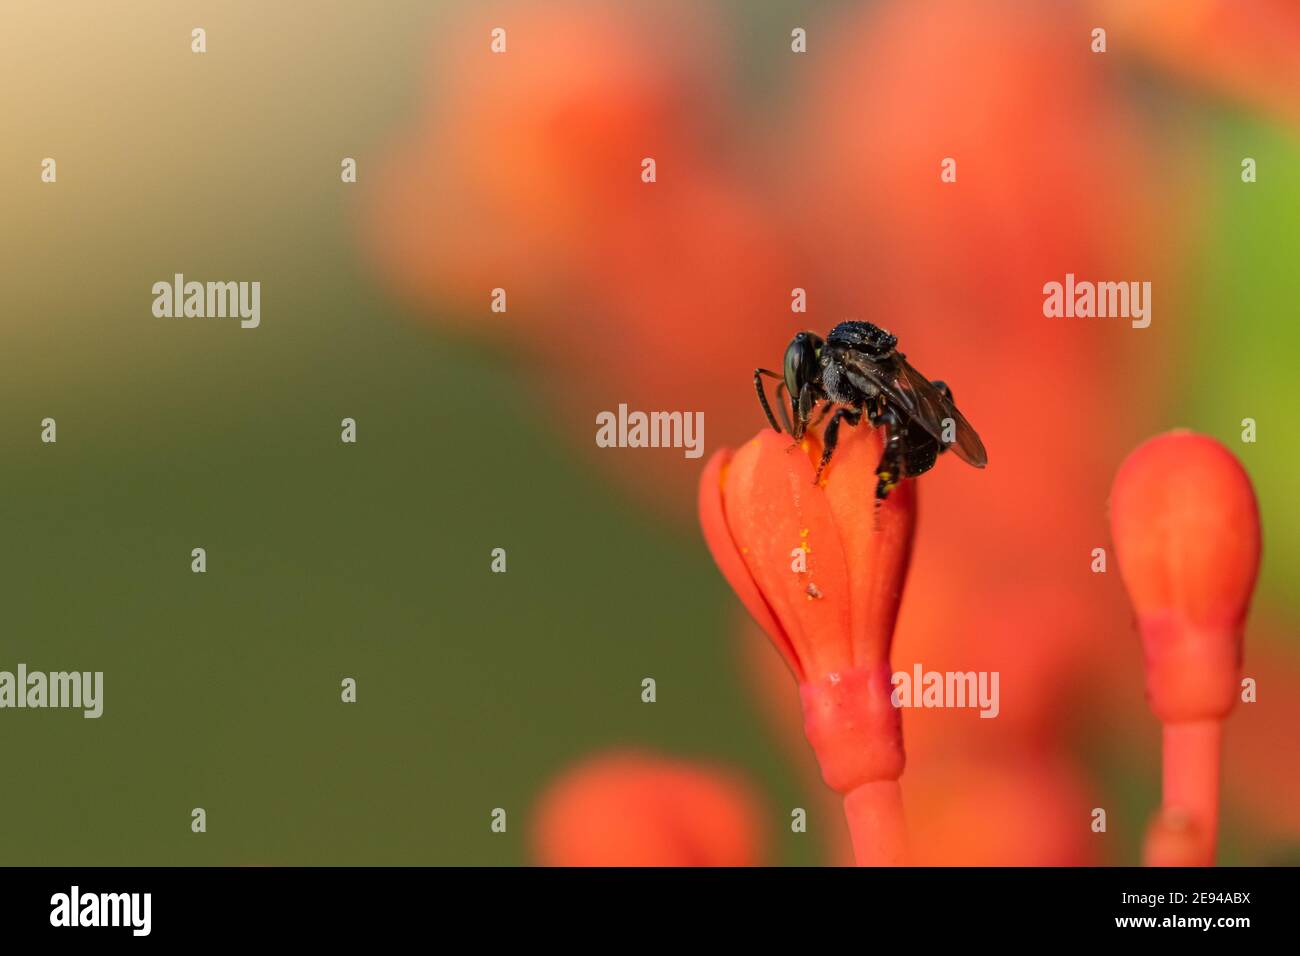 A close up Macro image of a small black bee taking nectar from a red flower Stock Photo